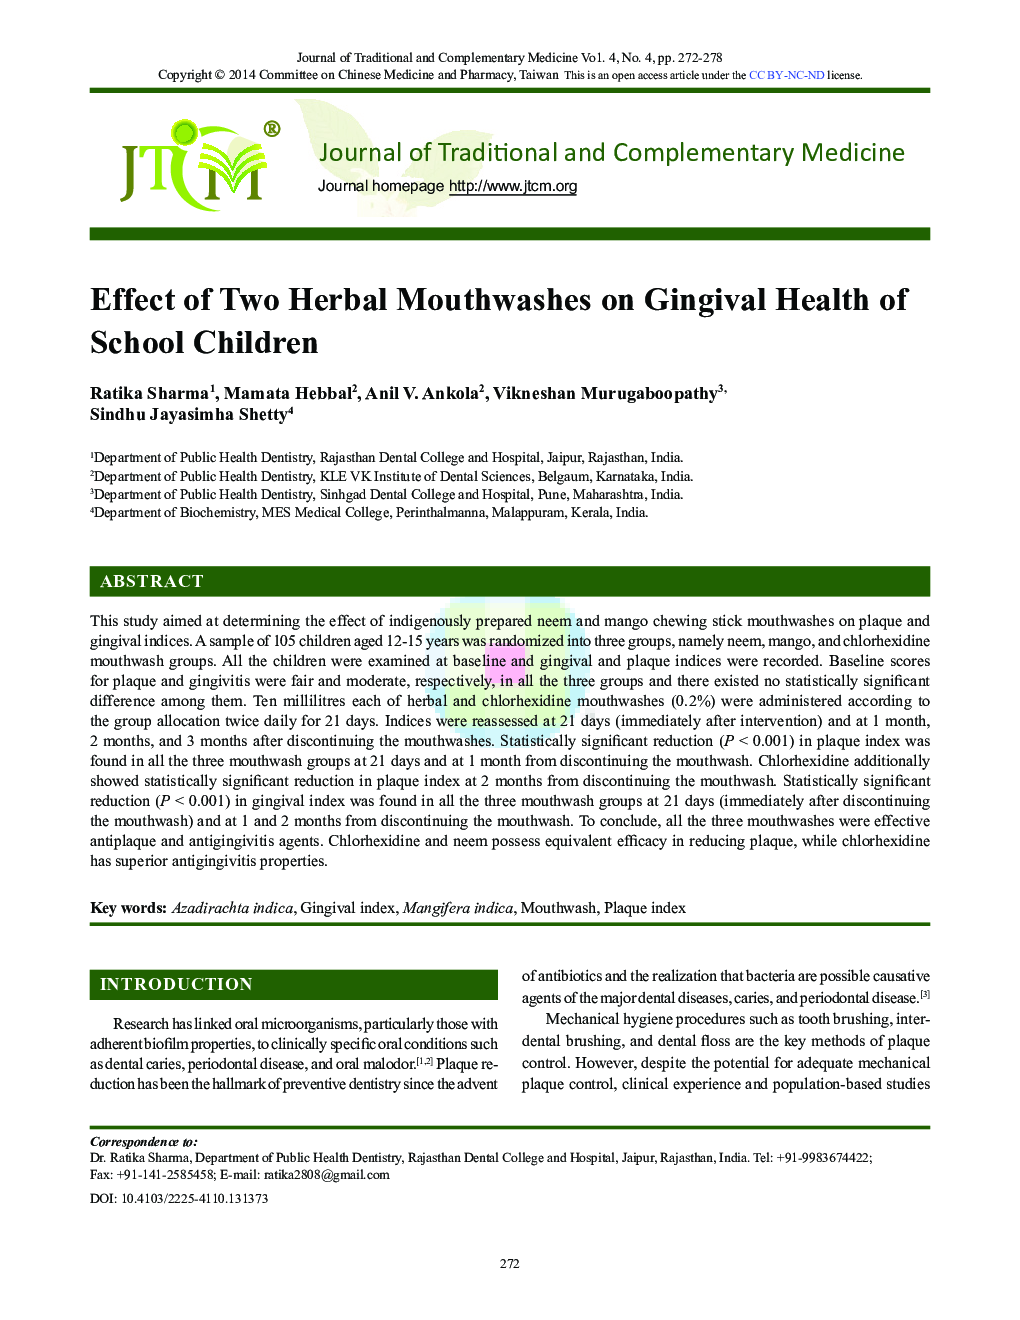 Effect of Two Herbal Mouthwashes on Gingival Health of School Children